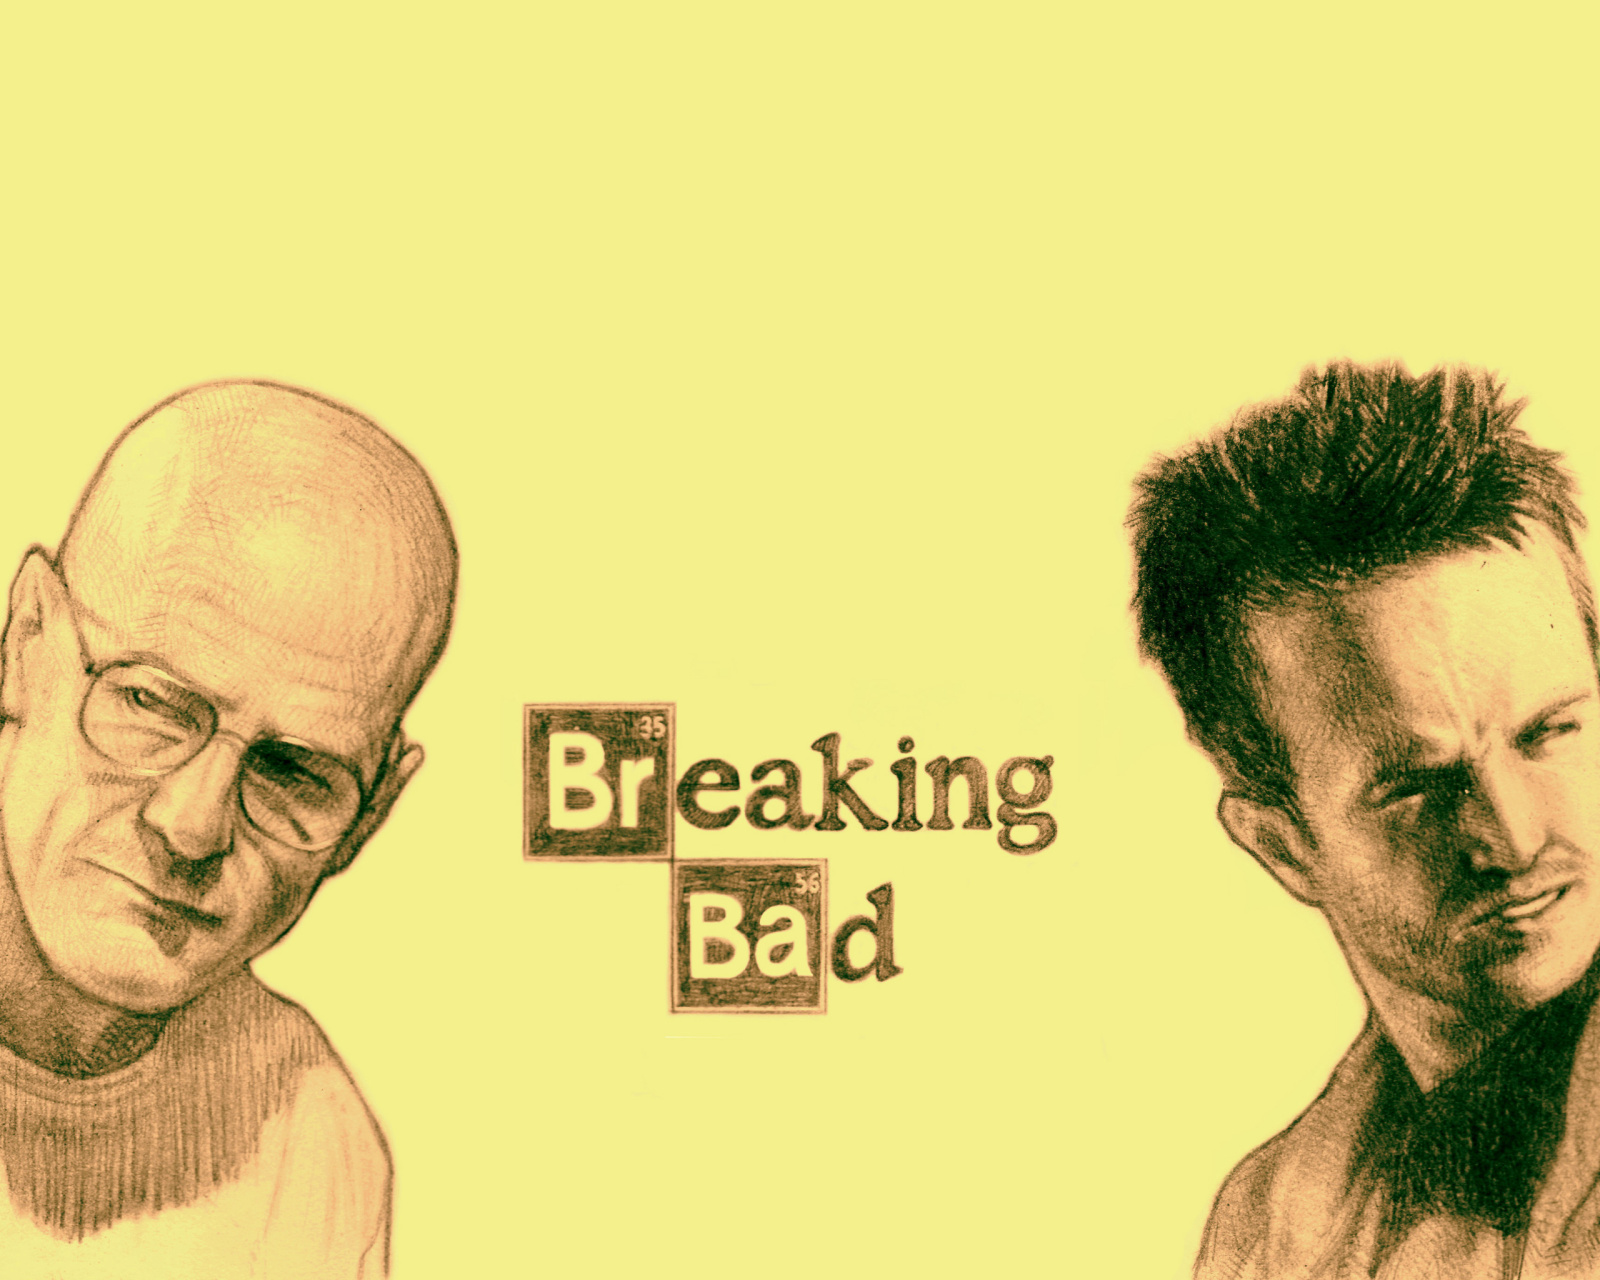 Walter White and Jesse Pinkman in Breaking Bad wallpaper 1600x1280